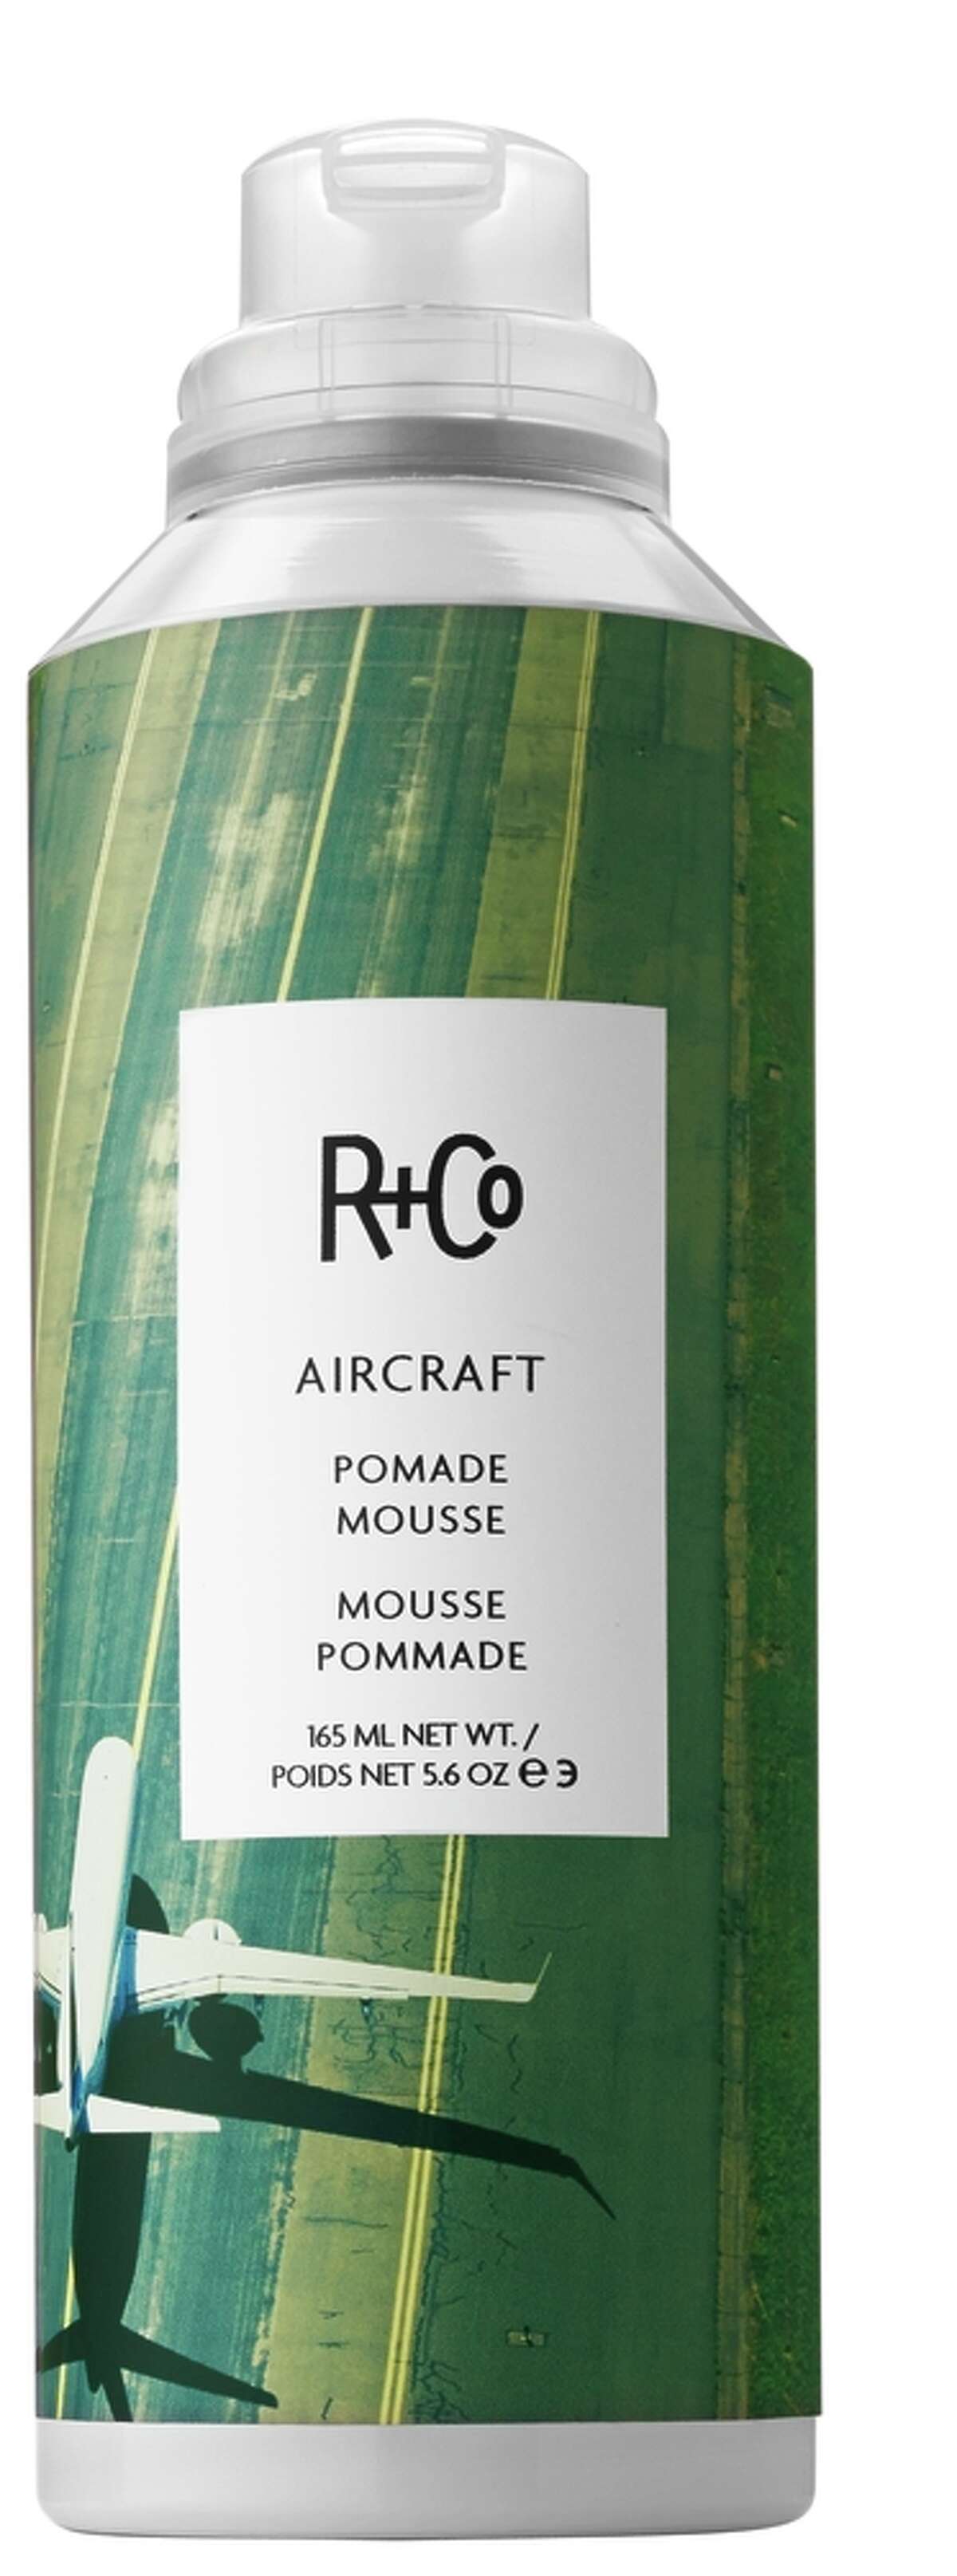 Michelle Snyder recommends R+Co Air Craft Pomade Mousse for a soft, disheveled look.